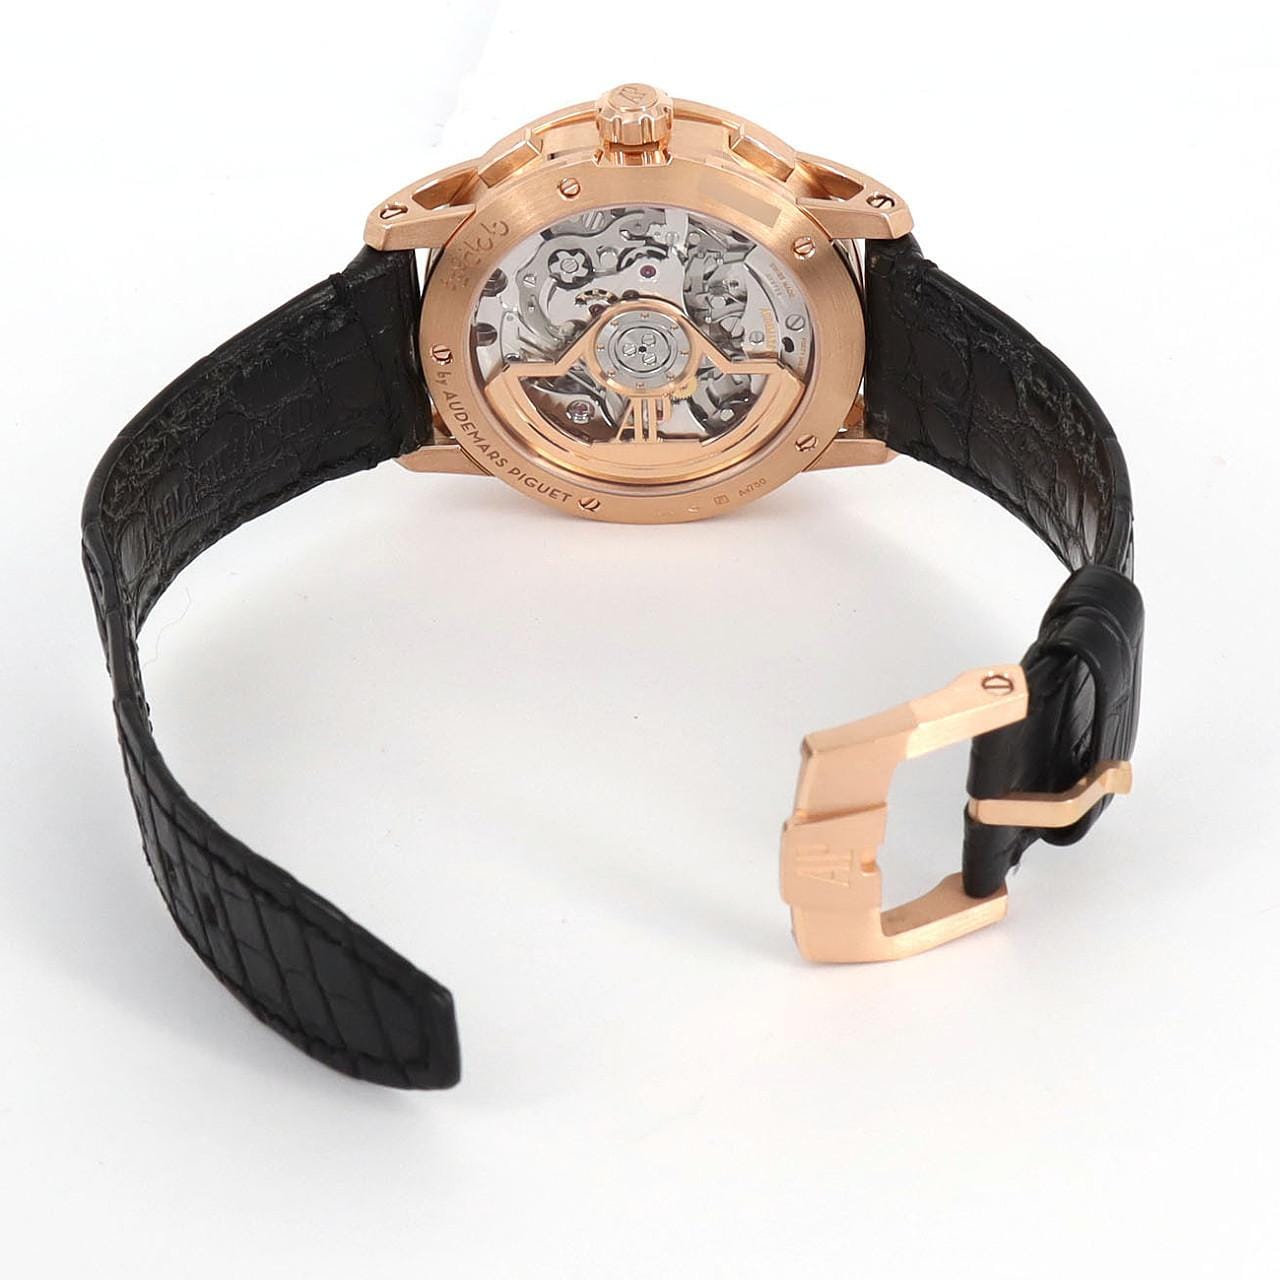 Audemars Piguet CODE11.59 Biode Macronograph PG 26393OR.OO.A002CR.01 PG/RG Automatic